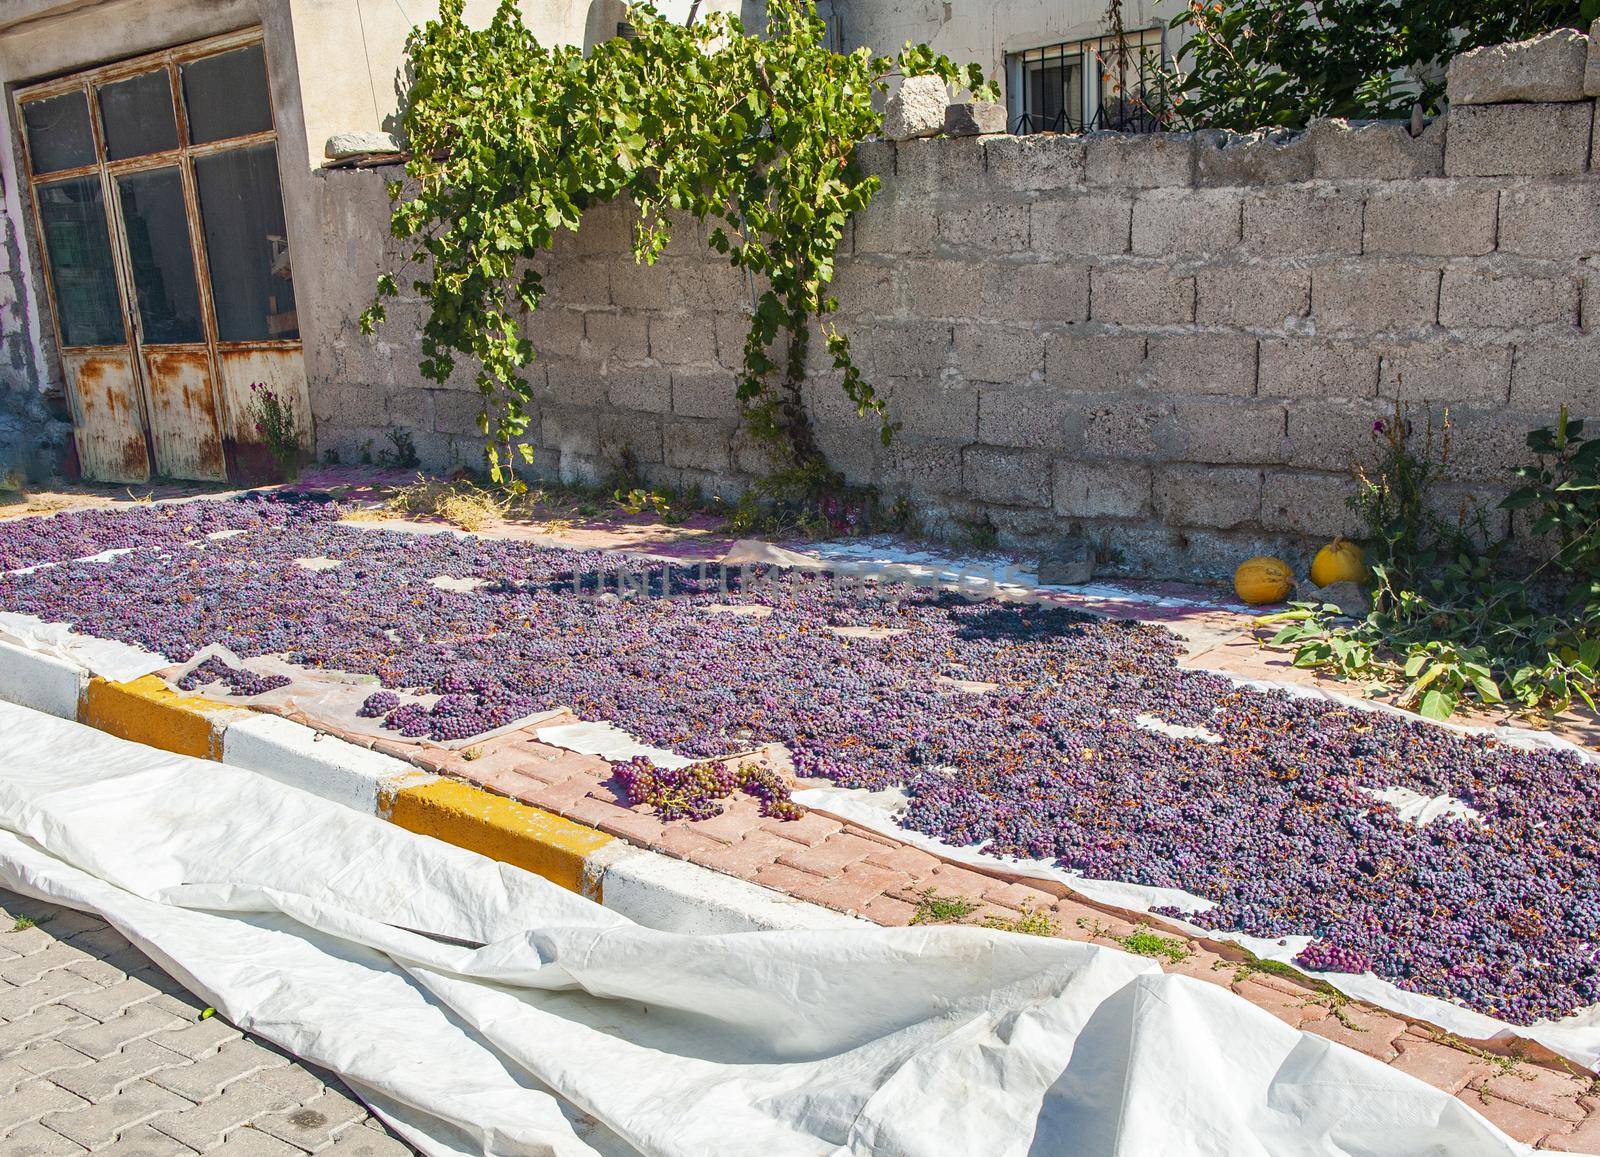 Red wine grapes are being dried to raisins in the direct sun just lying on the street in front of the house. Eastern Turkey